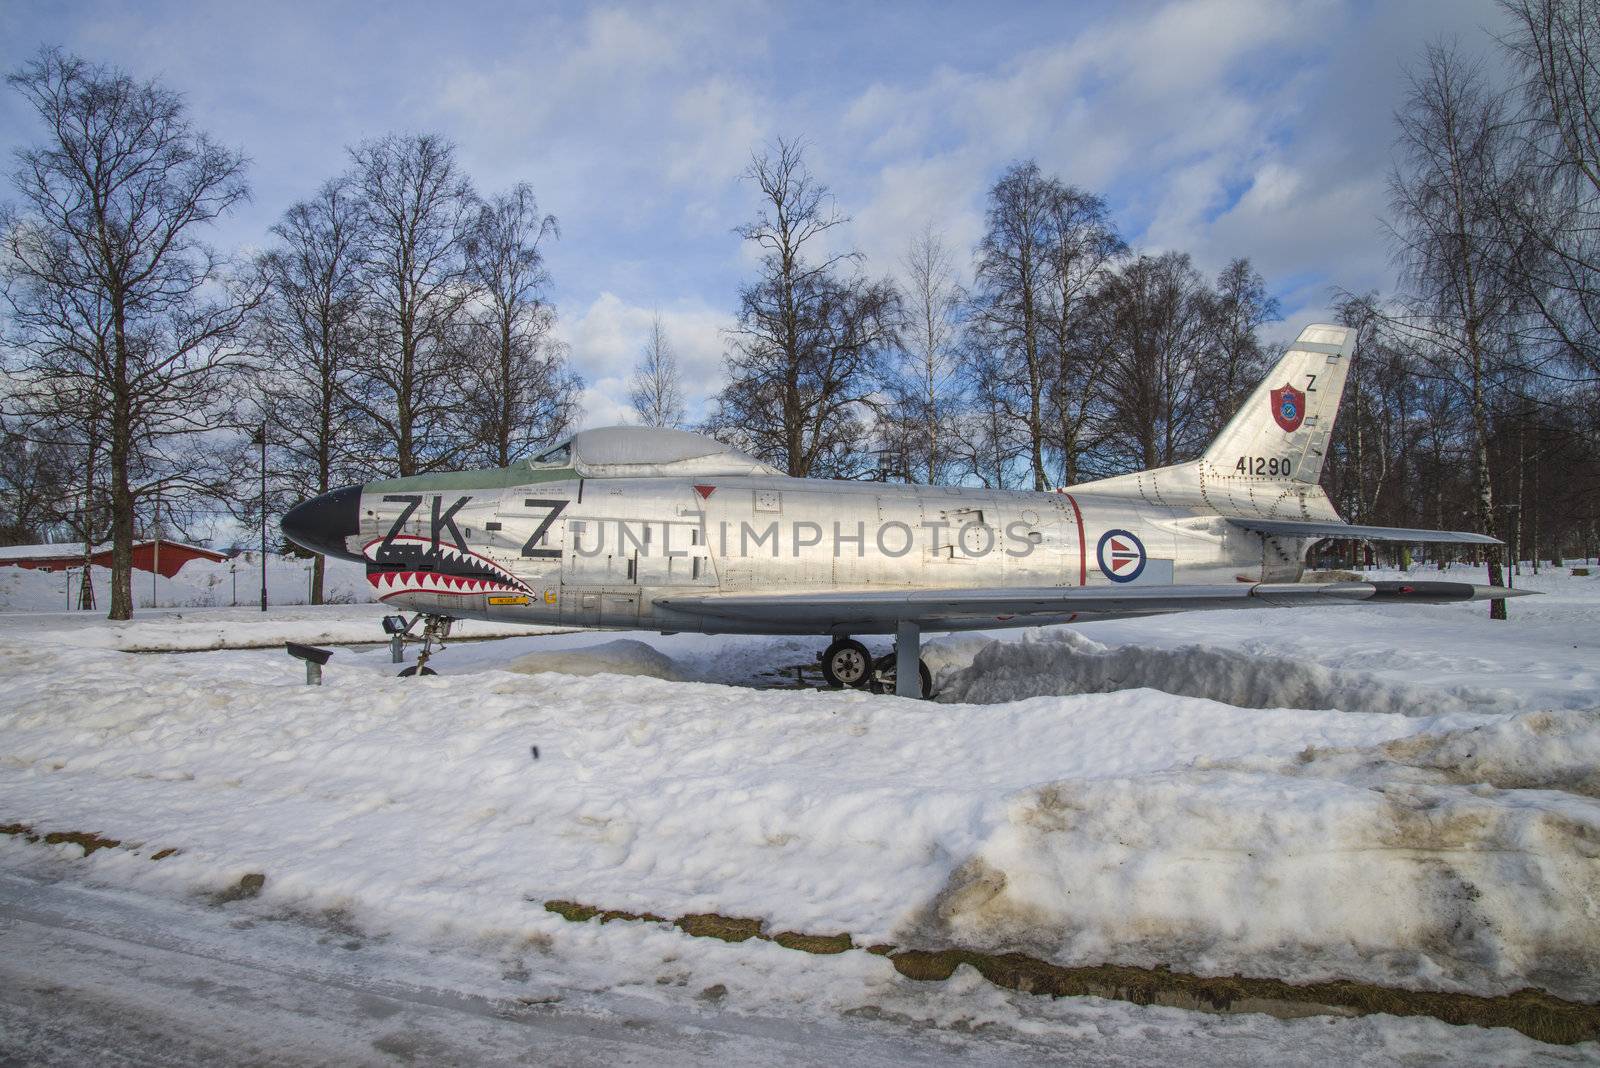 norwegian armed forces aircraft collection  is a military aviation museum located at gardermoen, north of oslo, norway, the pictures are shot in march 2013